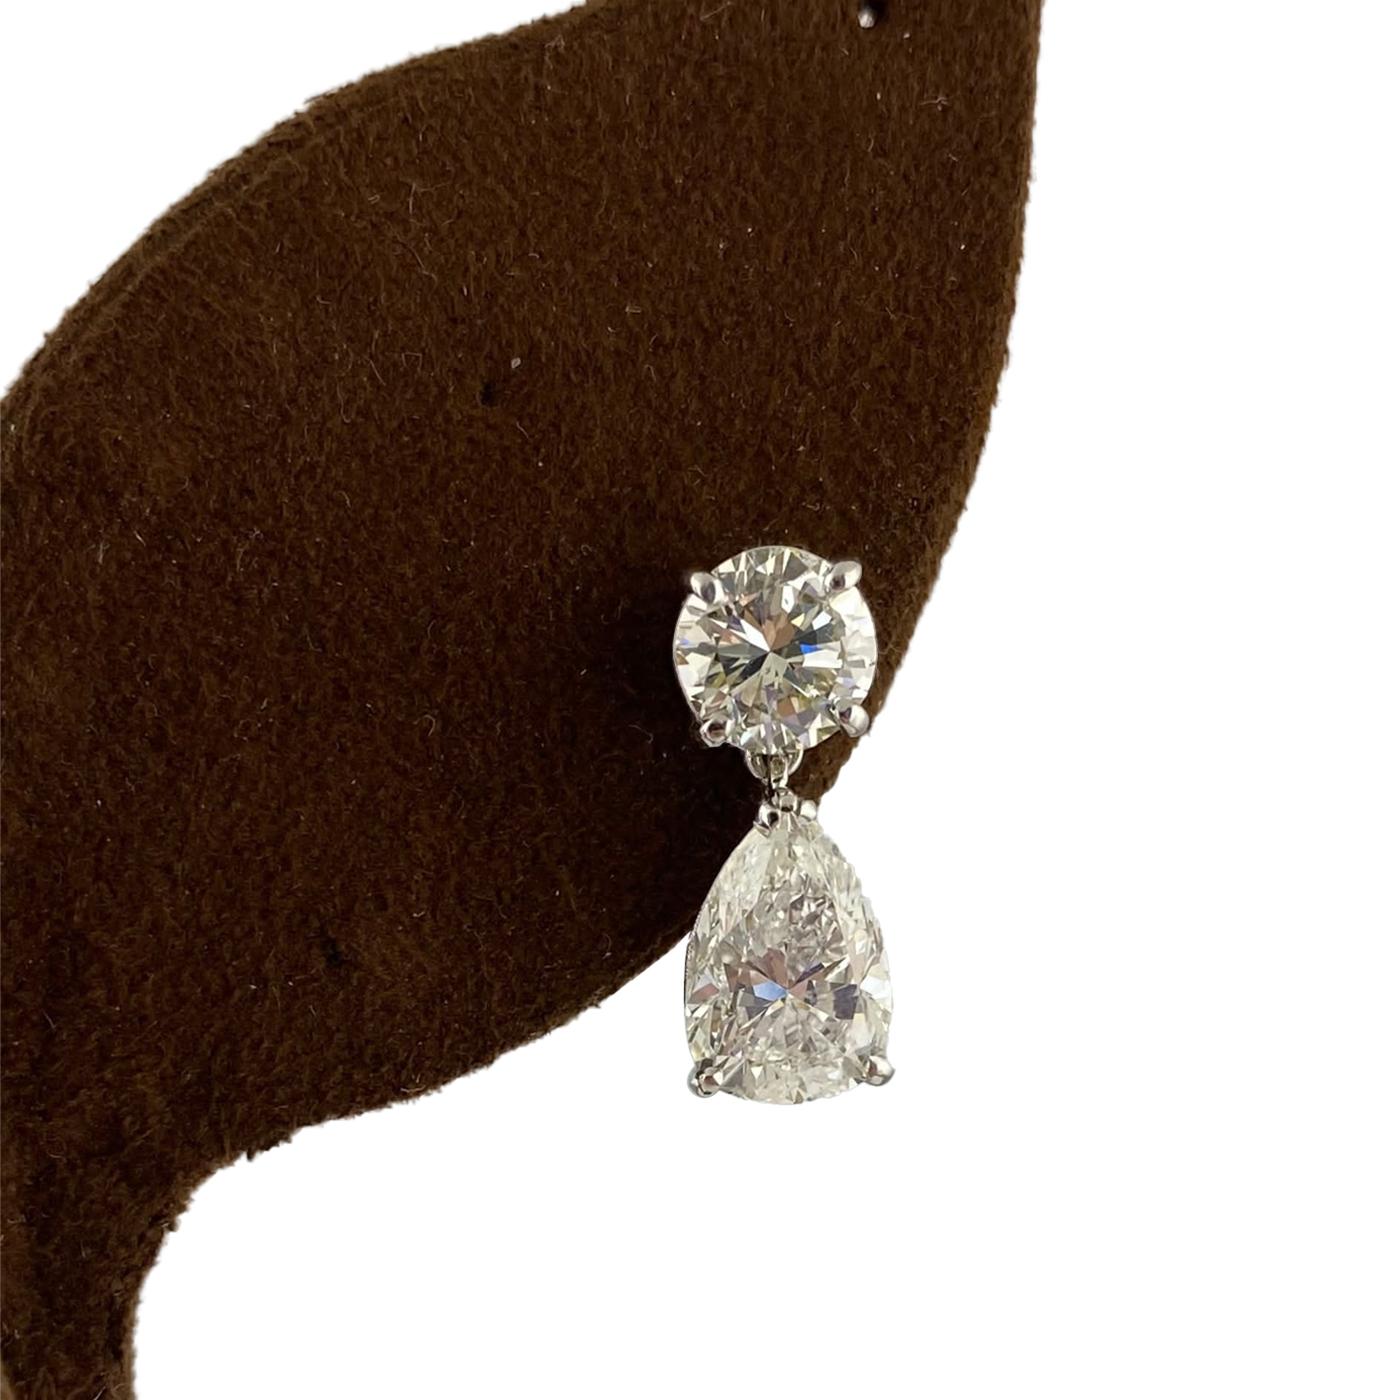 5.88ctw Natural Diamonds 14K Gold Pear Shape and Round Cut Diamonds Earrings For Sale 2